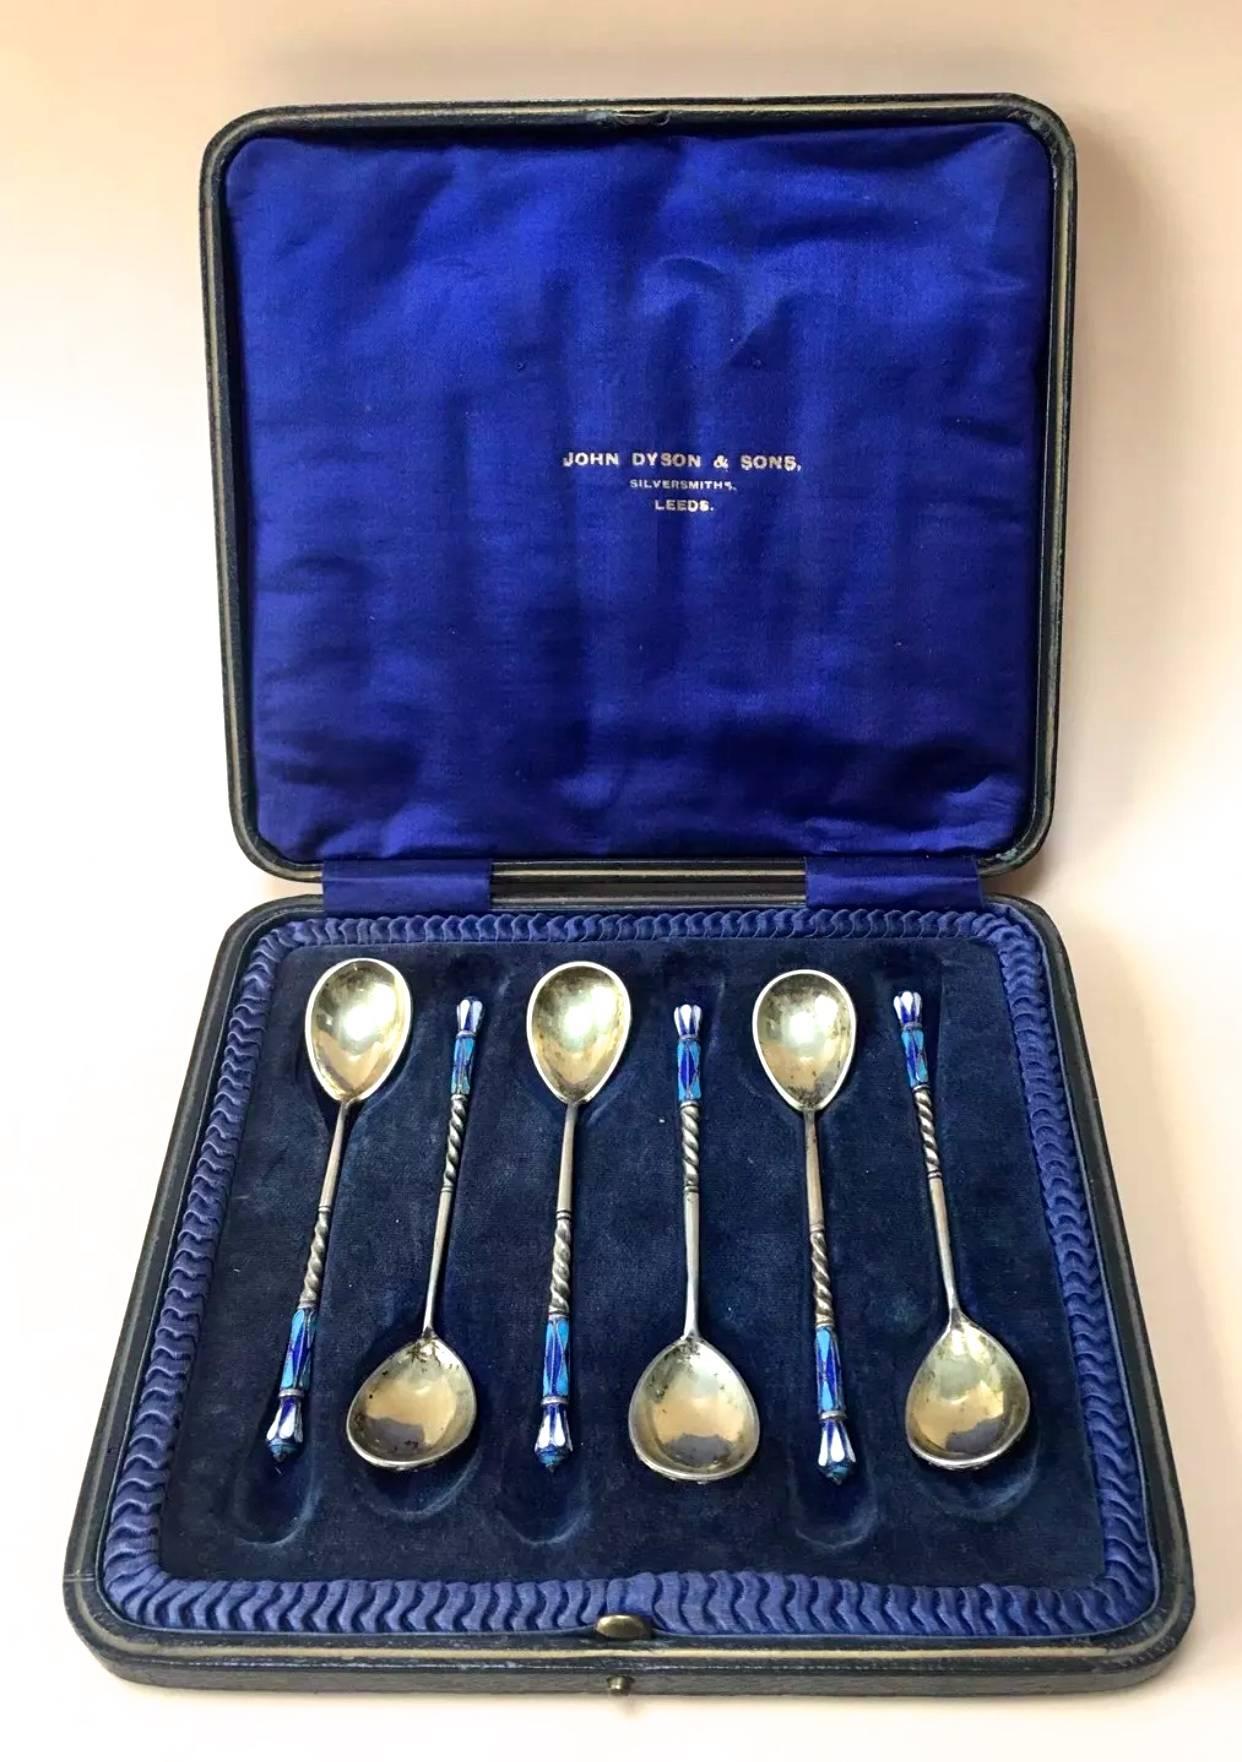 A good set of six Russian imperial silver cloisonné enamel spoons
The spoons have a beautiful design throughout, with delicate twisted stems, they are in excellent condition
The spoons come in a dark blue satin lined box, it is not original but is